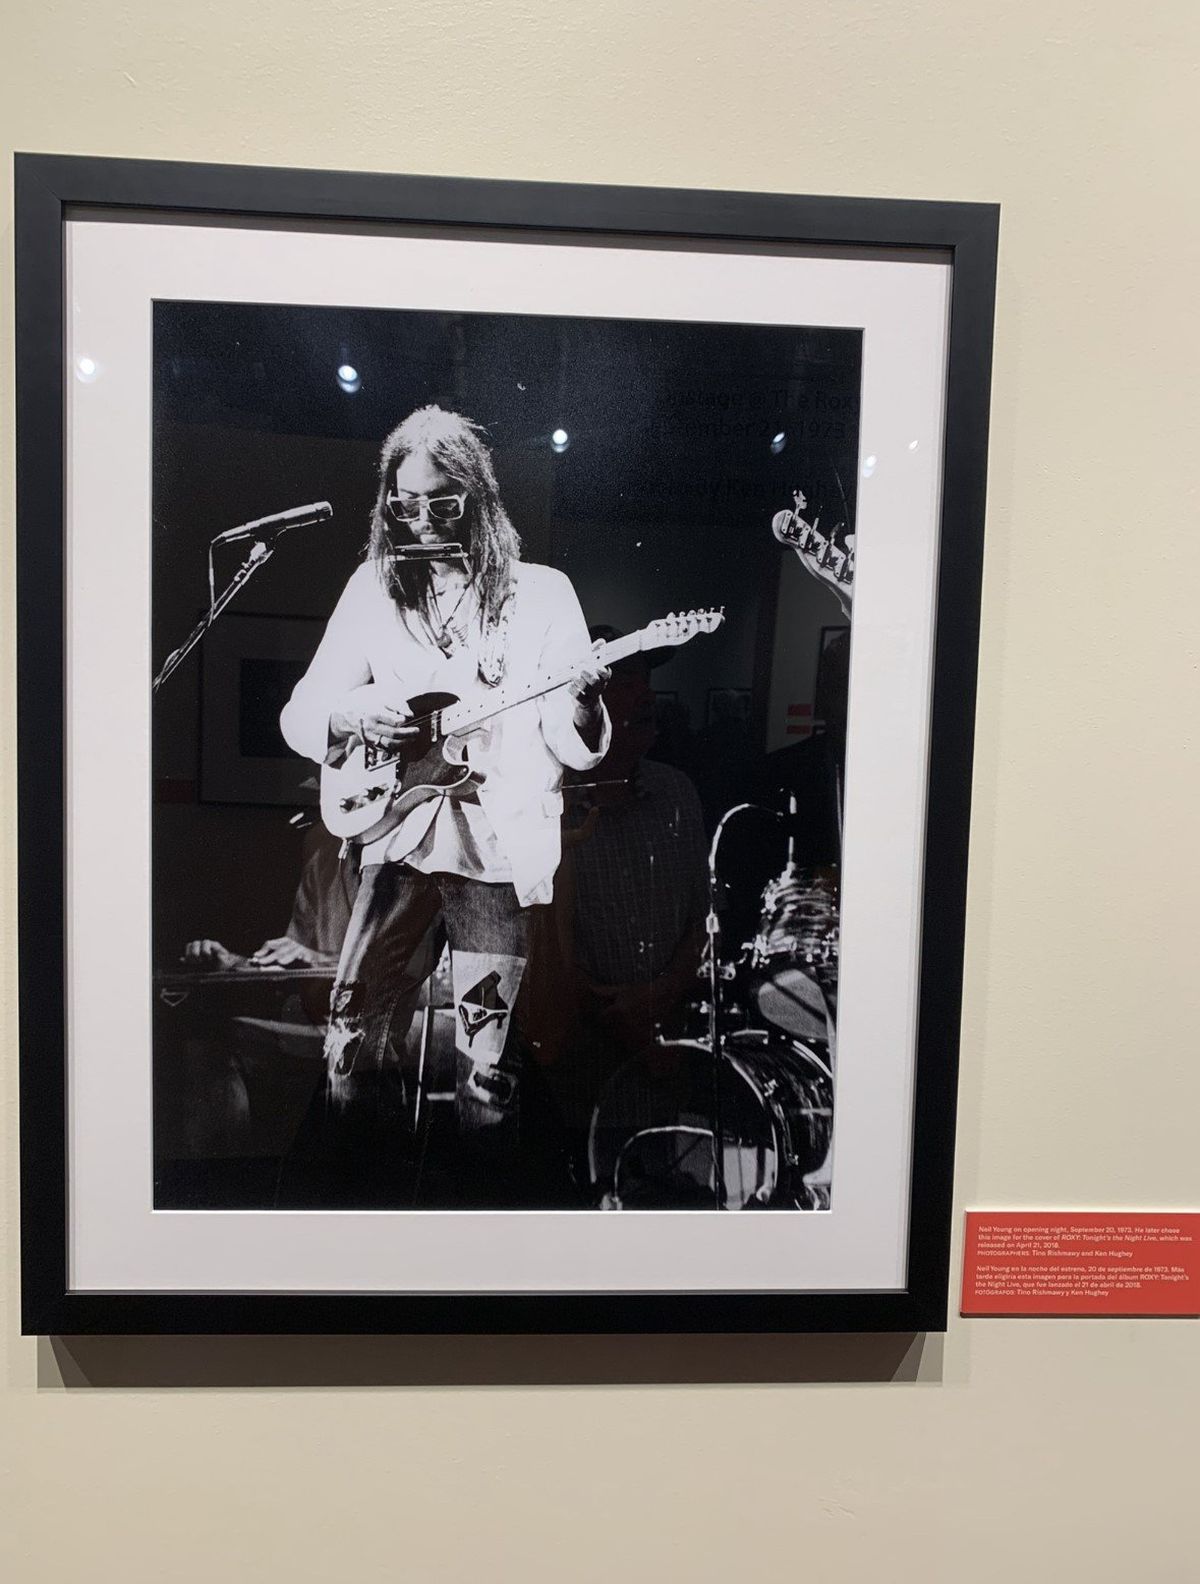 Ken Hughey’s photo of Neil Young, captured at the Roxy in 1973, is in an exhibition at the Grammy Museum celebrating the club’s 50 years. 